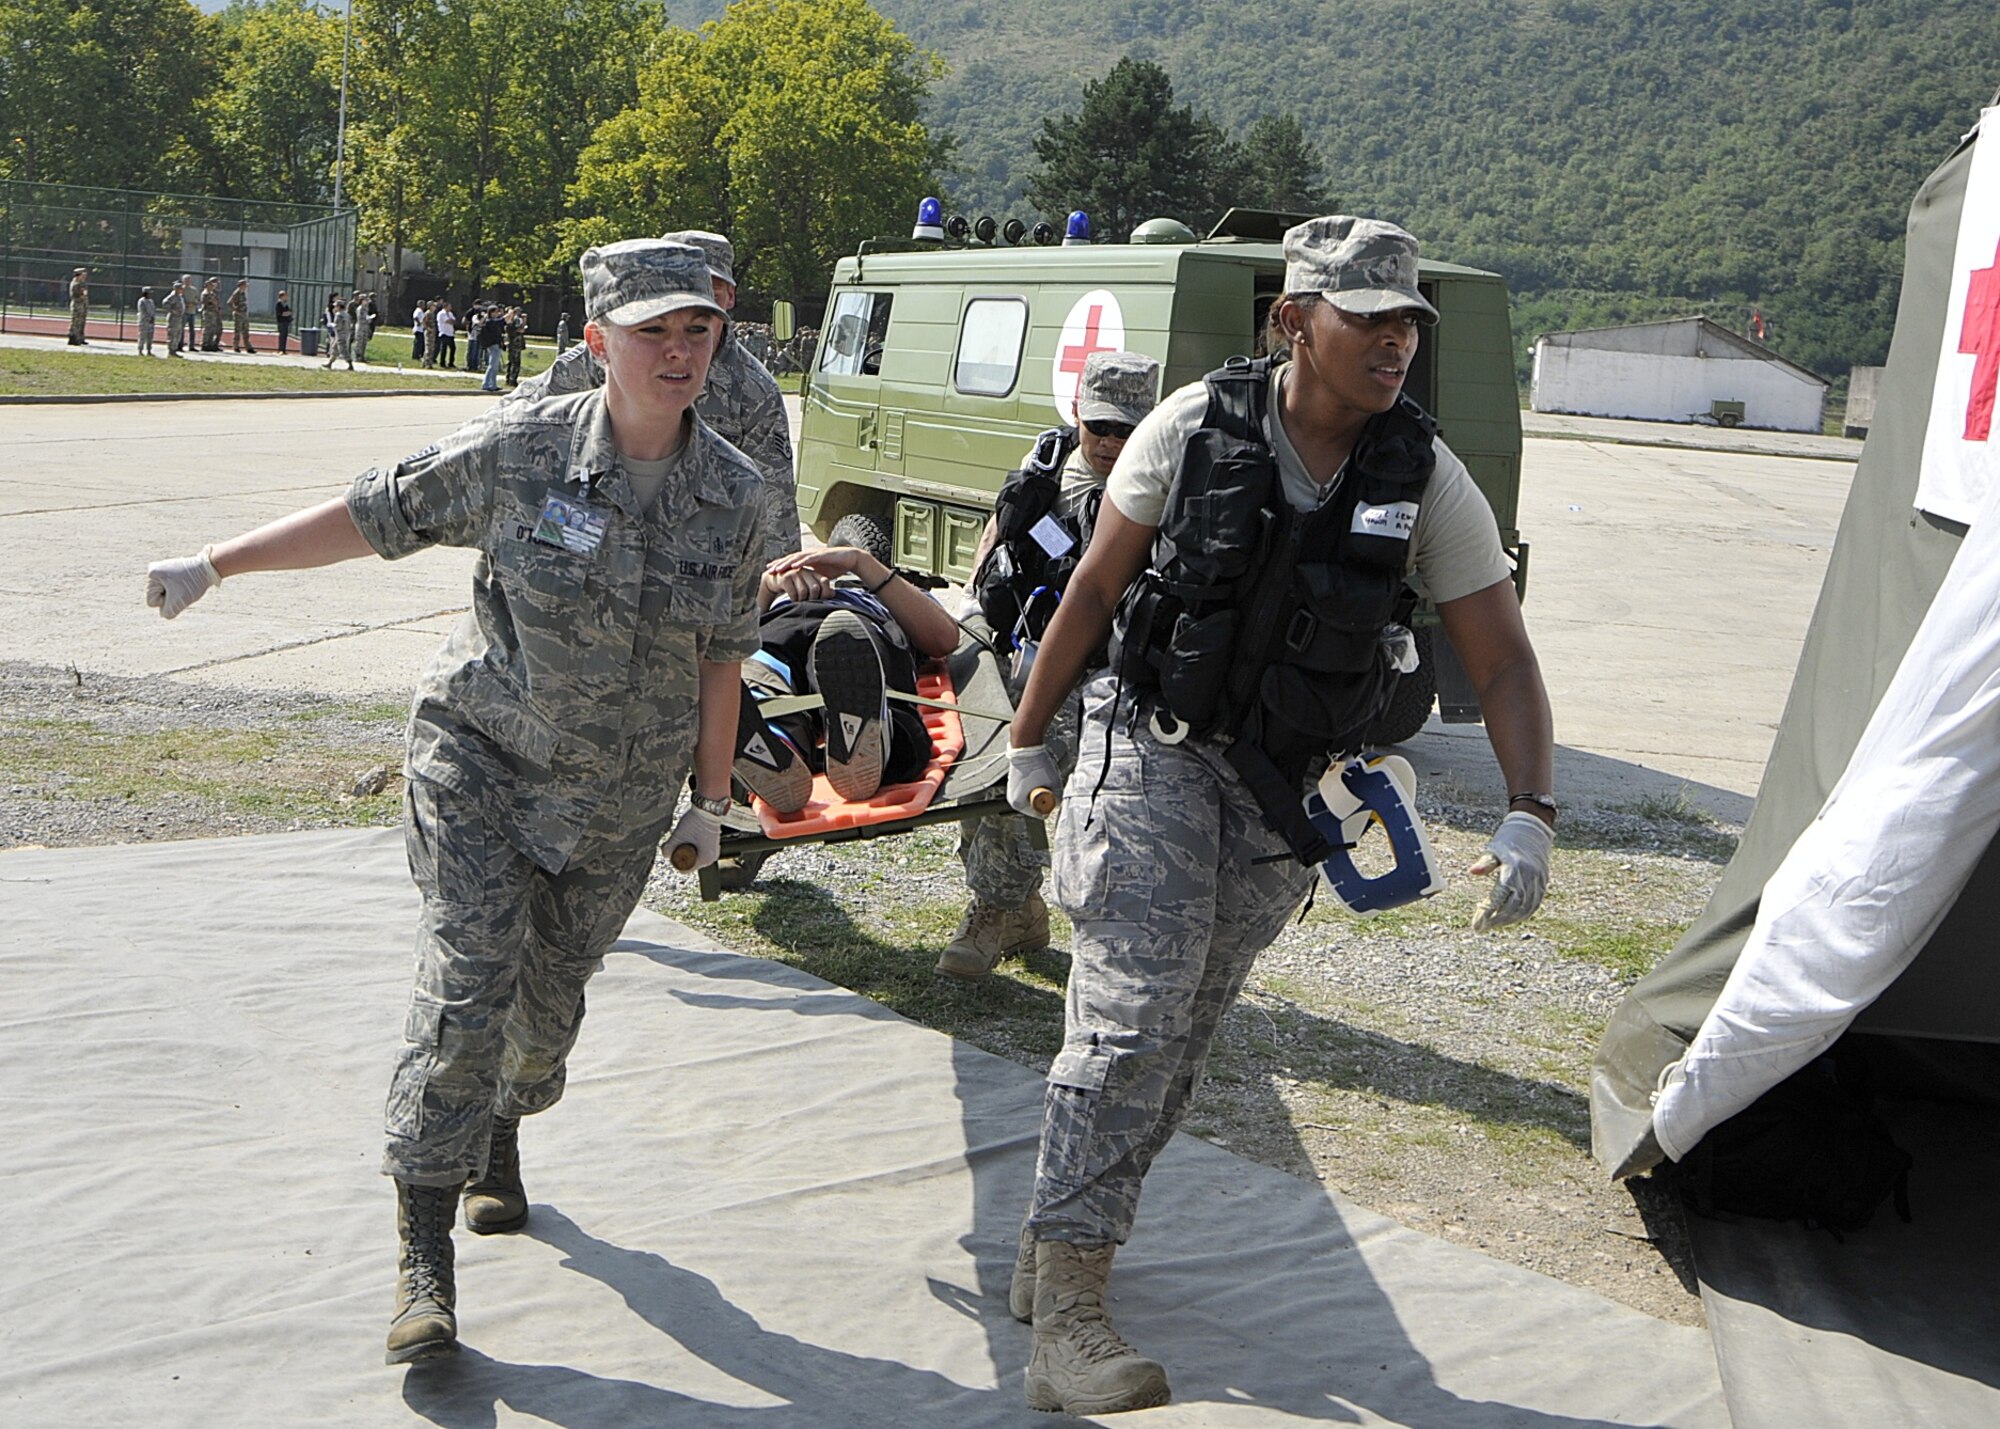 United States Air Force Tech. Sgt. Tonya O'Toole, Staff Sgt. Kamesha Lewis, Staff Sgt. Jacob Good and Staff Sgt. Vince Remo, (left to right), all of the 48th Medical Group at RAF Lakenheath, England, carry an acting victim on a litter during a medical exercise scenario as government ministers, flag officers and other distinguished visitors watch during MEDCEUR 10, a medical training exercise in central and eastern Europe, at Danilovgrad Army Base, Montenegro Sept. 17. For more information, go to www.usafe.af.mil/medceur.asp and www.odbrana.gov.me. (U.S. Air Force photo/Airman 1st Class Tiffany M. Deuel)